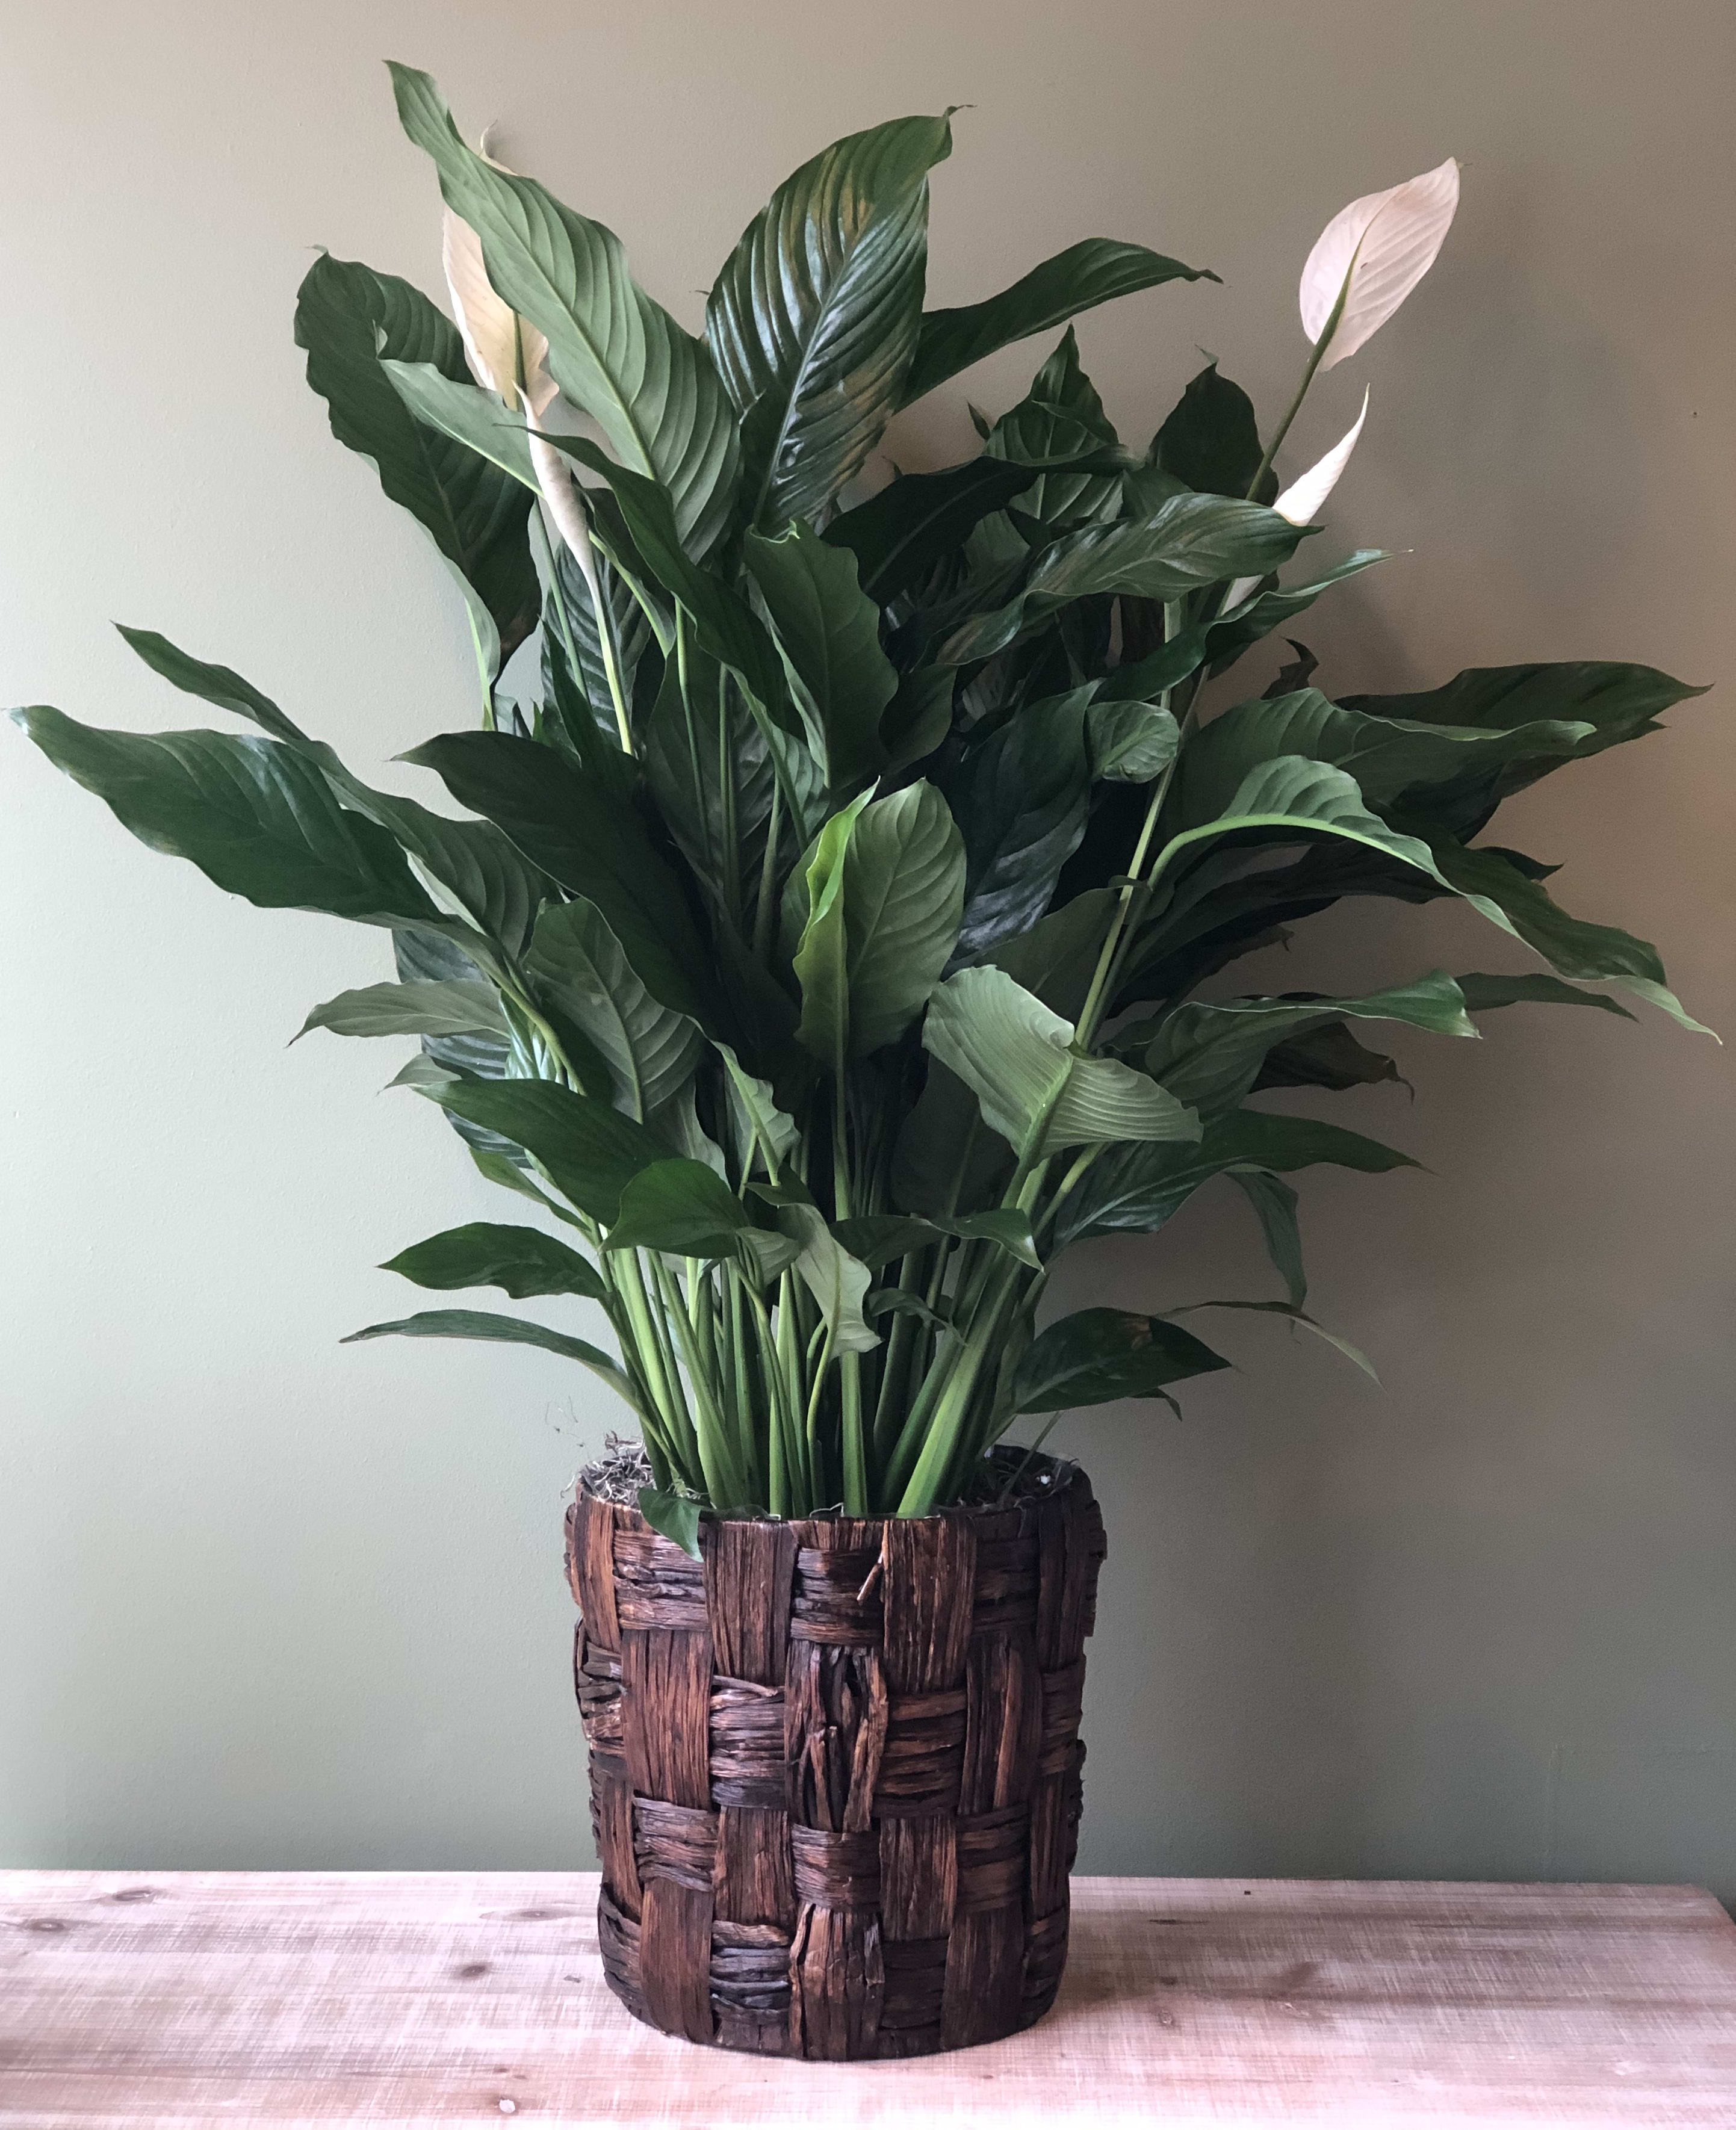 spathiphyllum Peace lily spathiphyllum graceful plant indoor